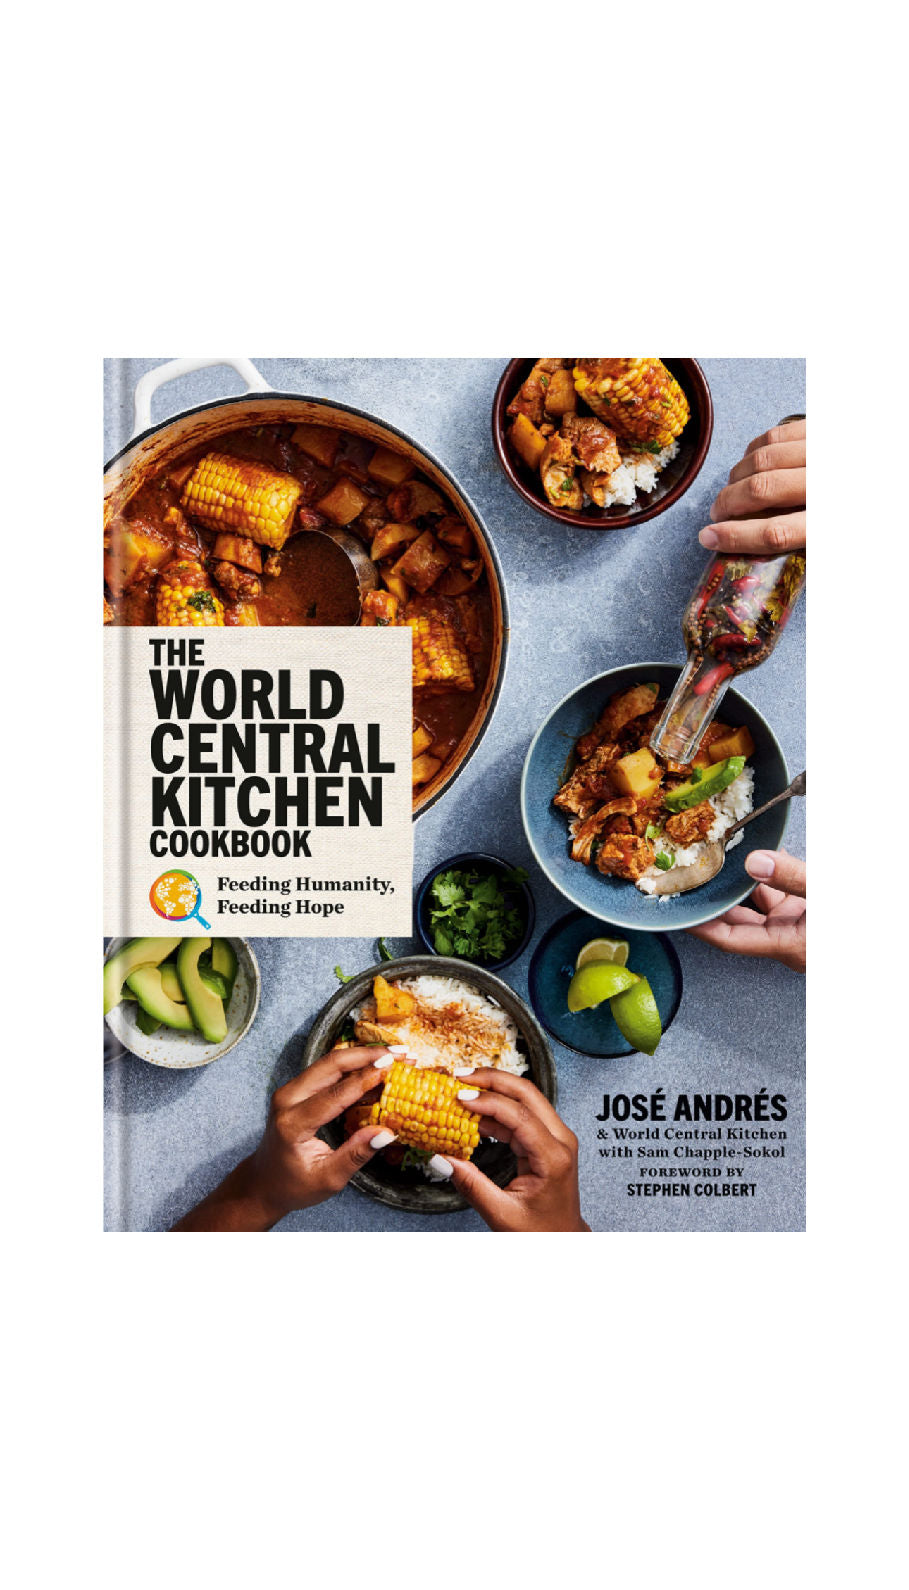 The World Central Kitchen Cookbook / JOSE ANDRES & WCK - COMING SEPT. 12TH!